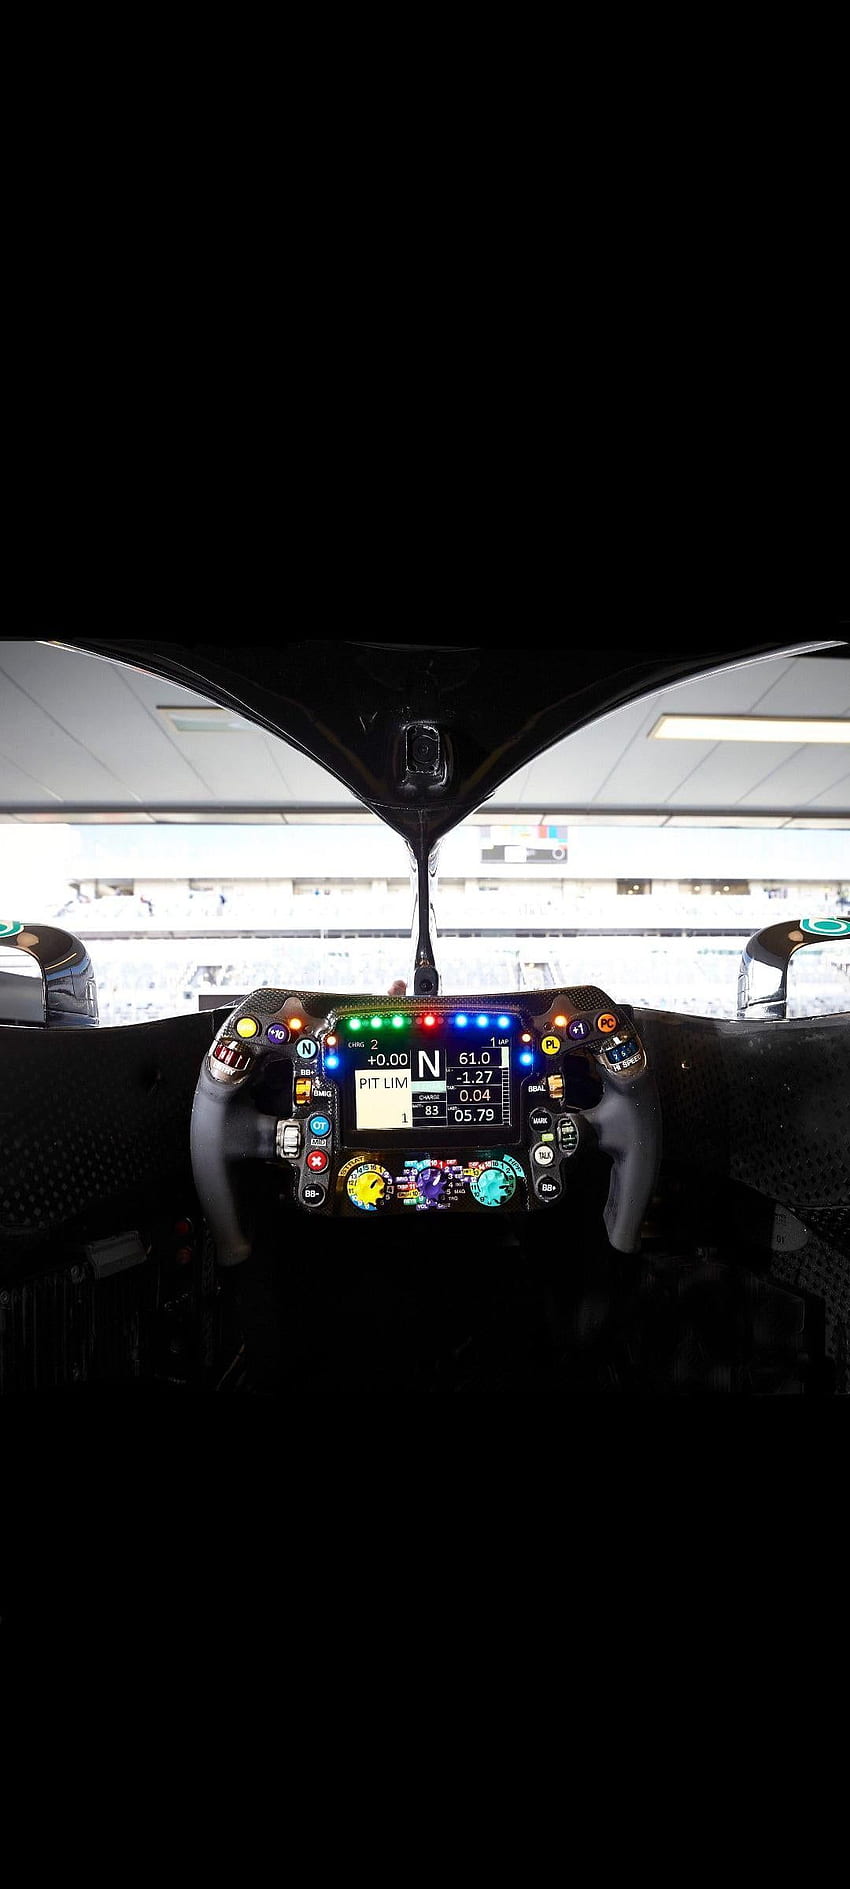 Mercedes AMG Petronas F1 car cockpit view, showing steering wheel and protective halo device : Amoledbackground HD phone wallpaper